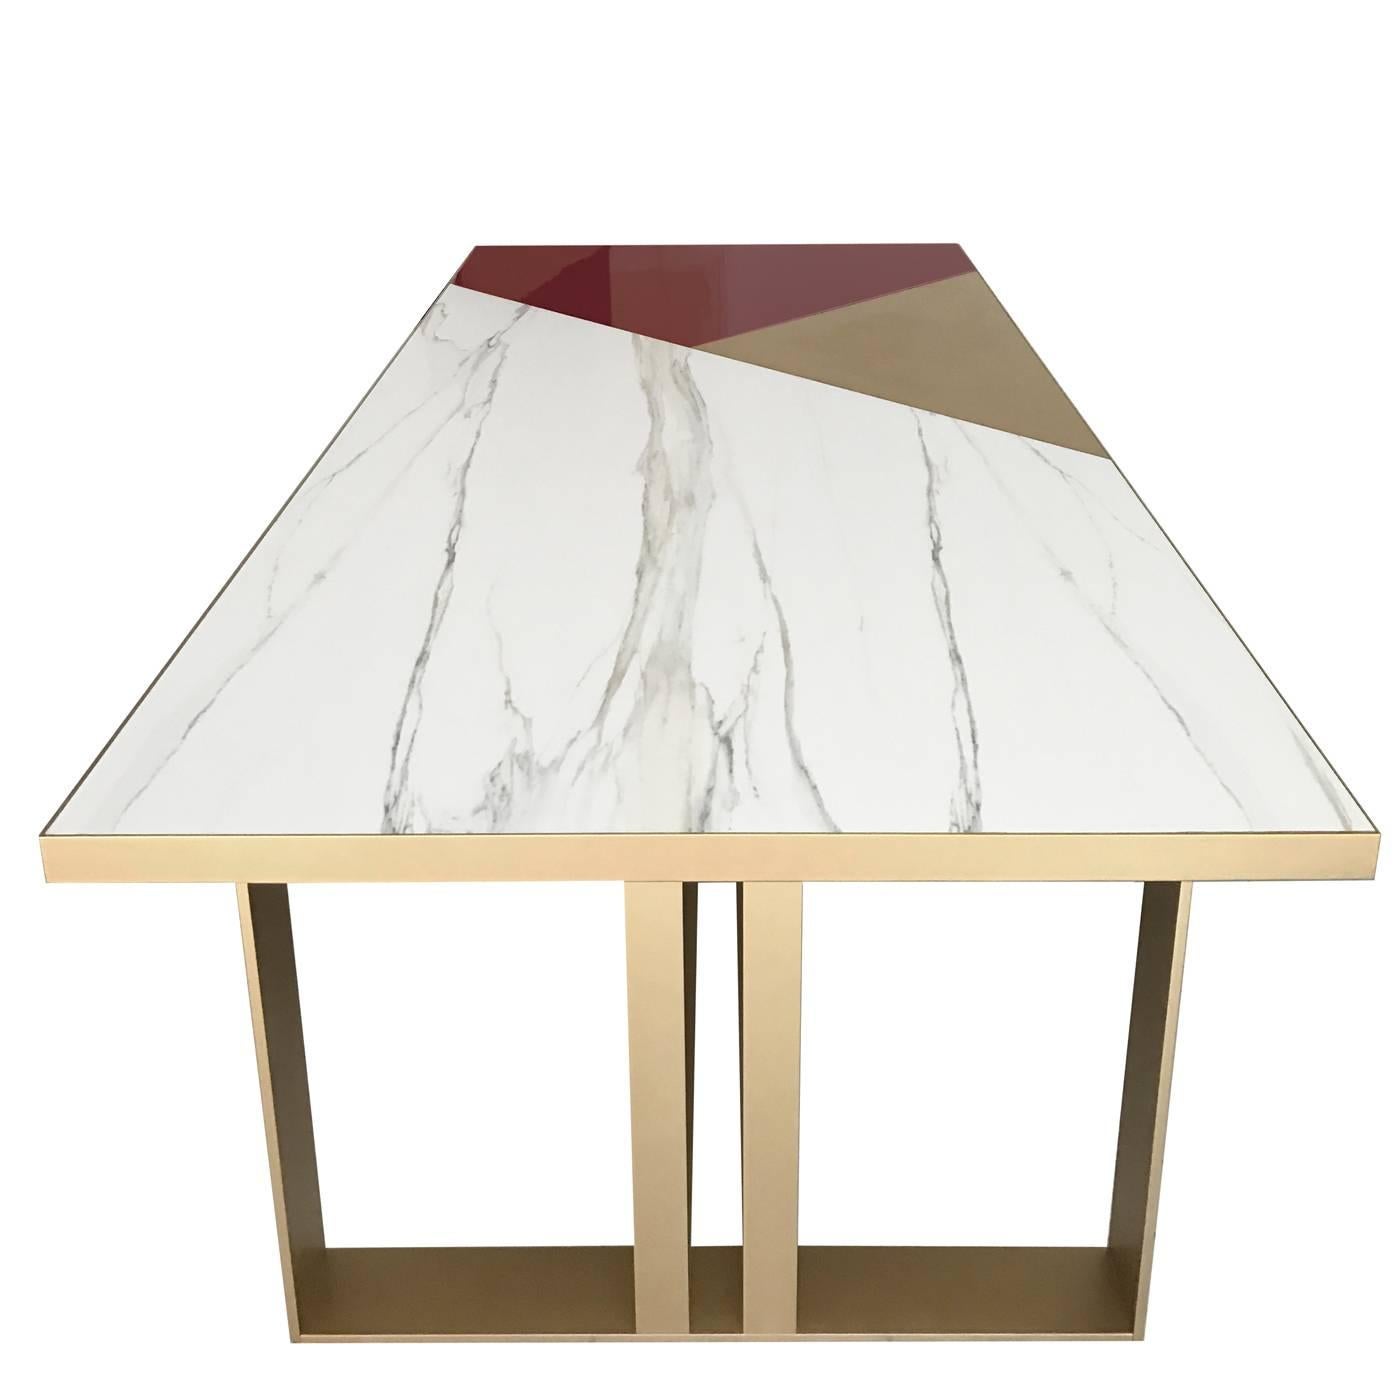 This unique dining table will make a statement in any decor, thanks to its exquisite craftsmanship by expert artisans, the use of noble materials, and the timeless allure of its Silhouette. The brushed brass structure has a golden finish and is